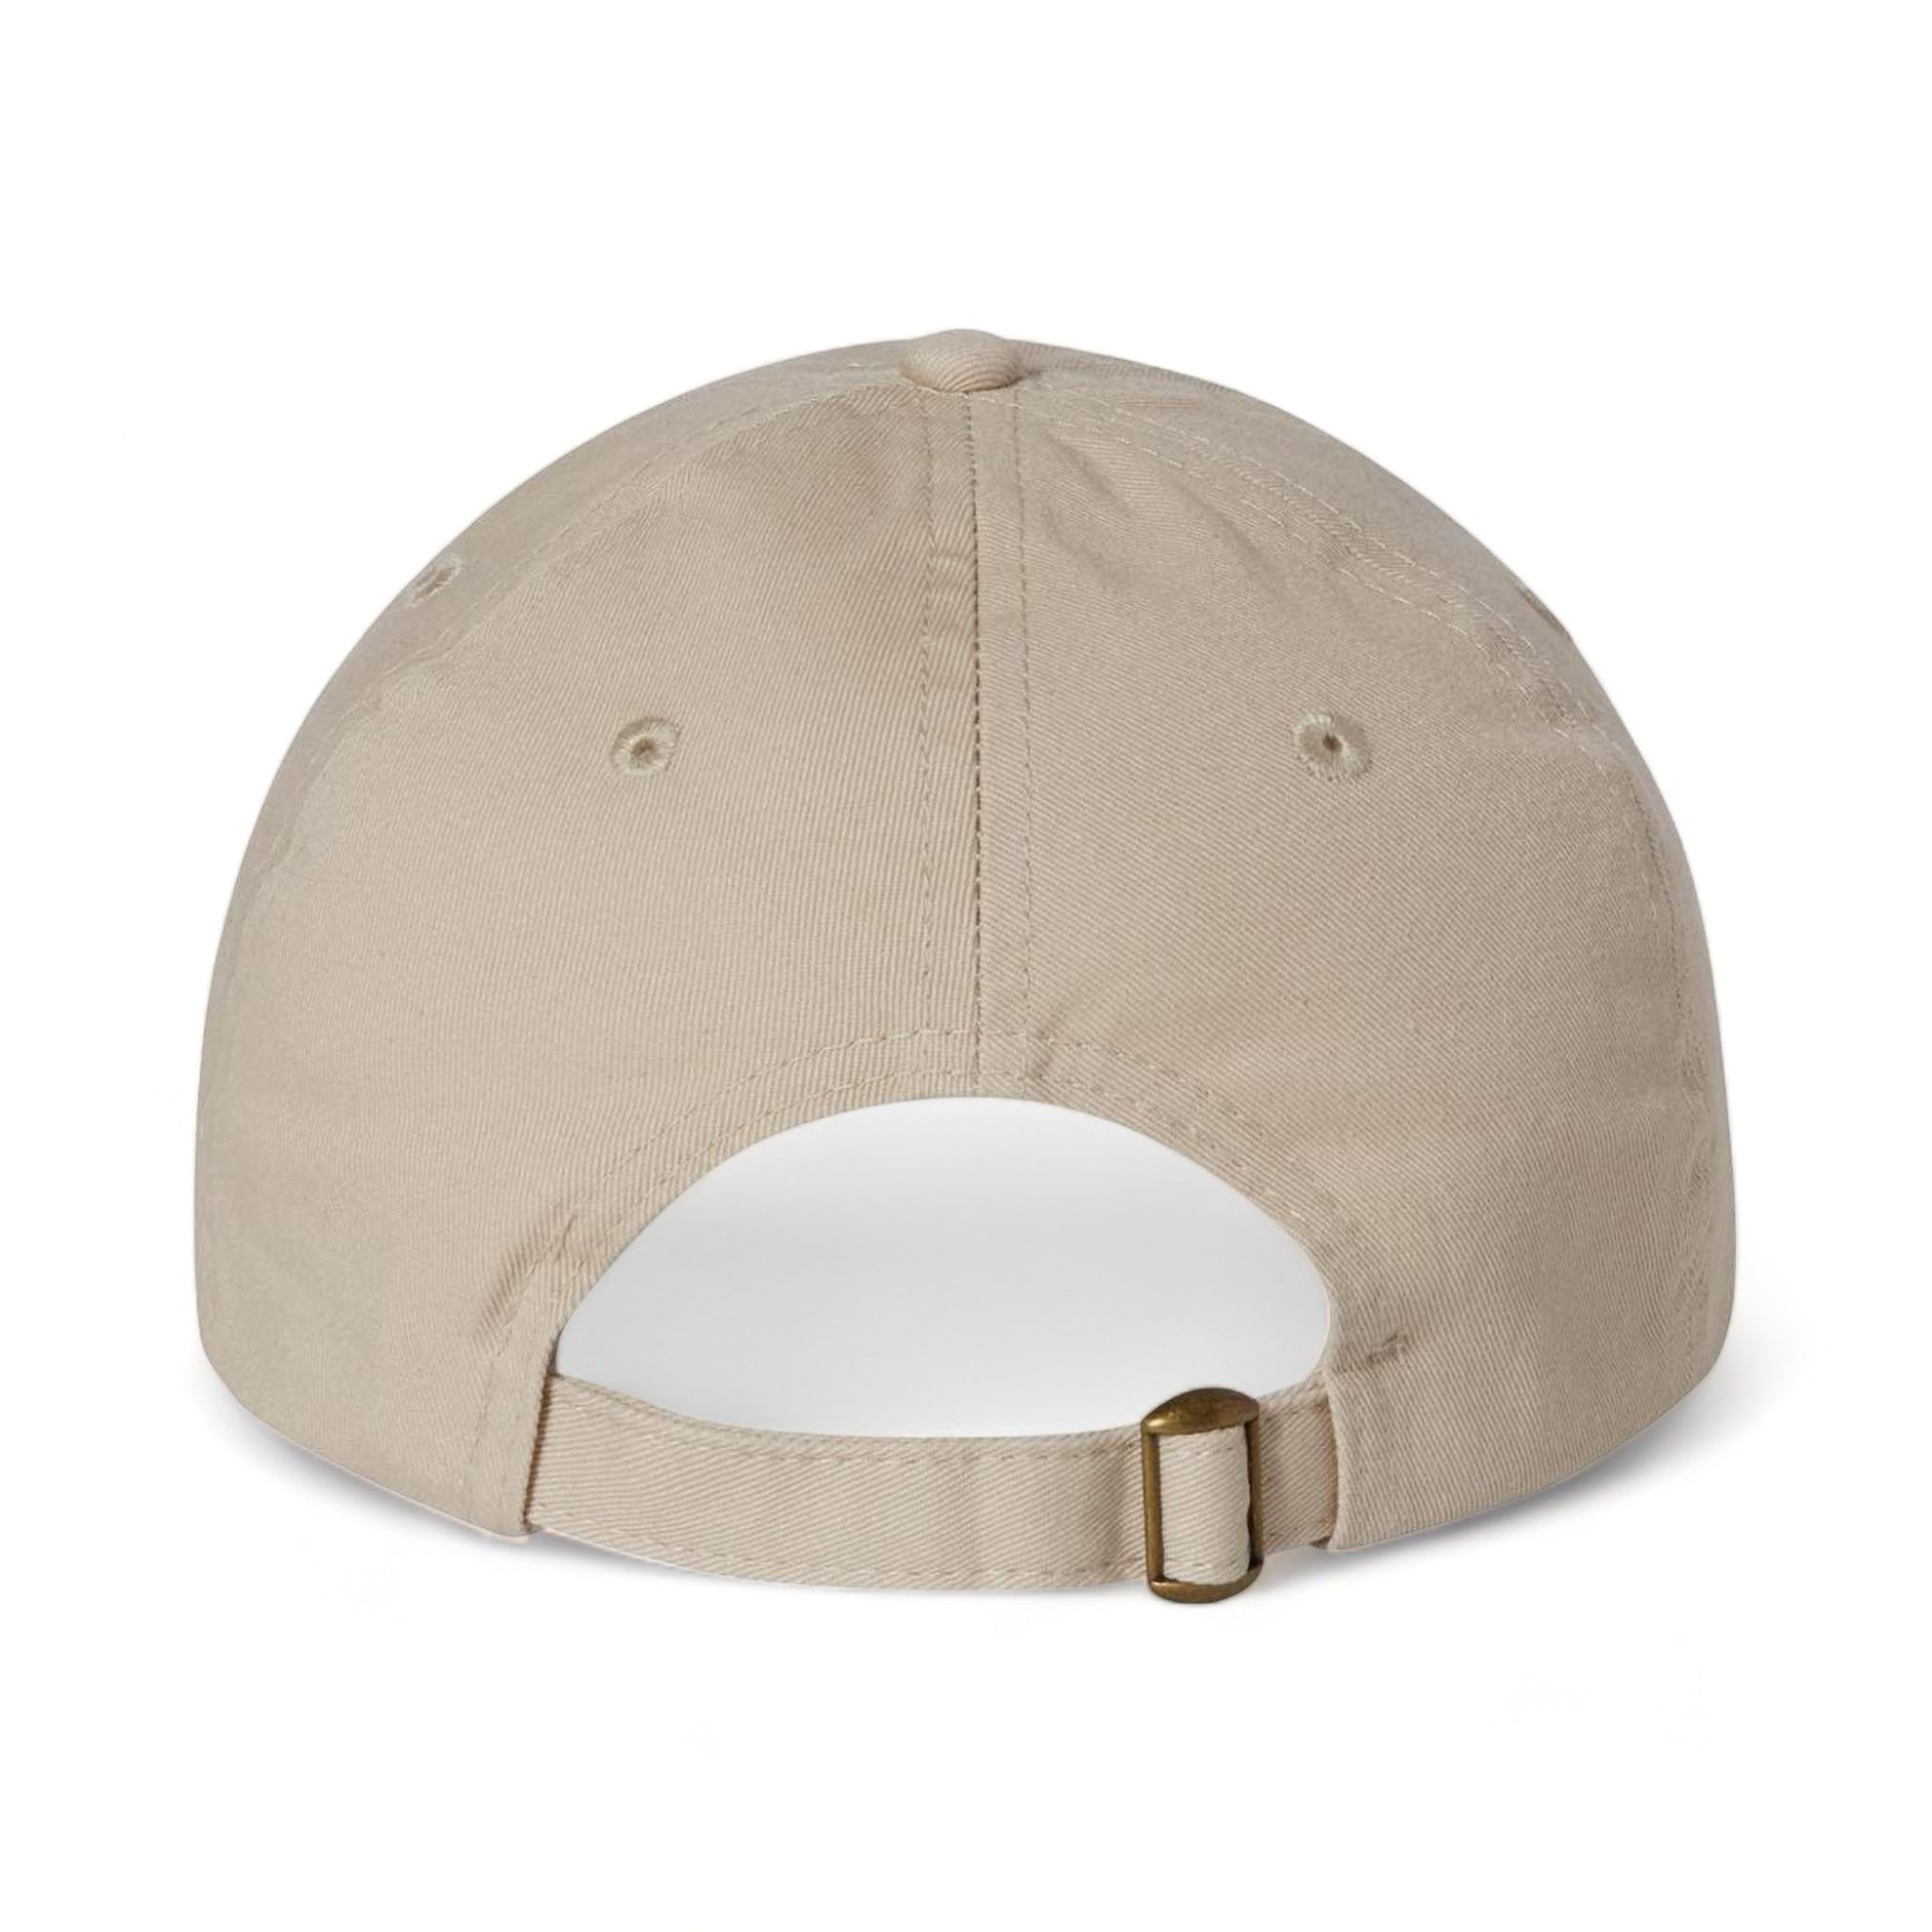 Back view of Valucap VC300A custom hat in stone